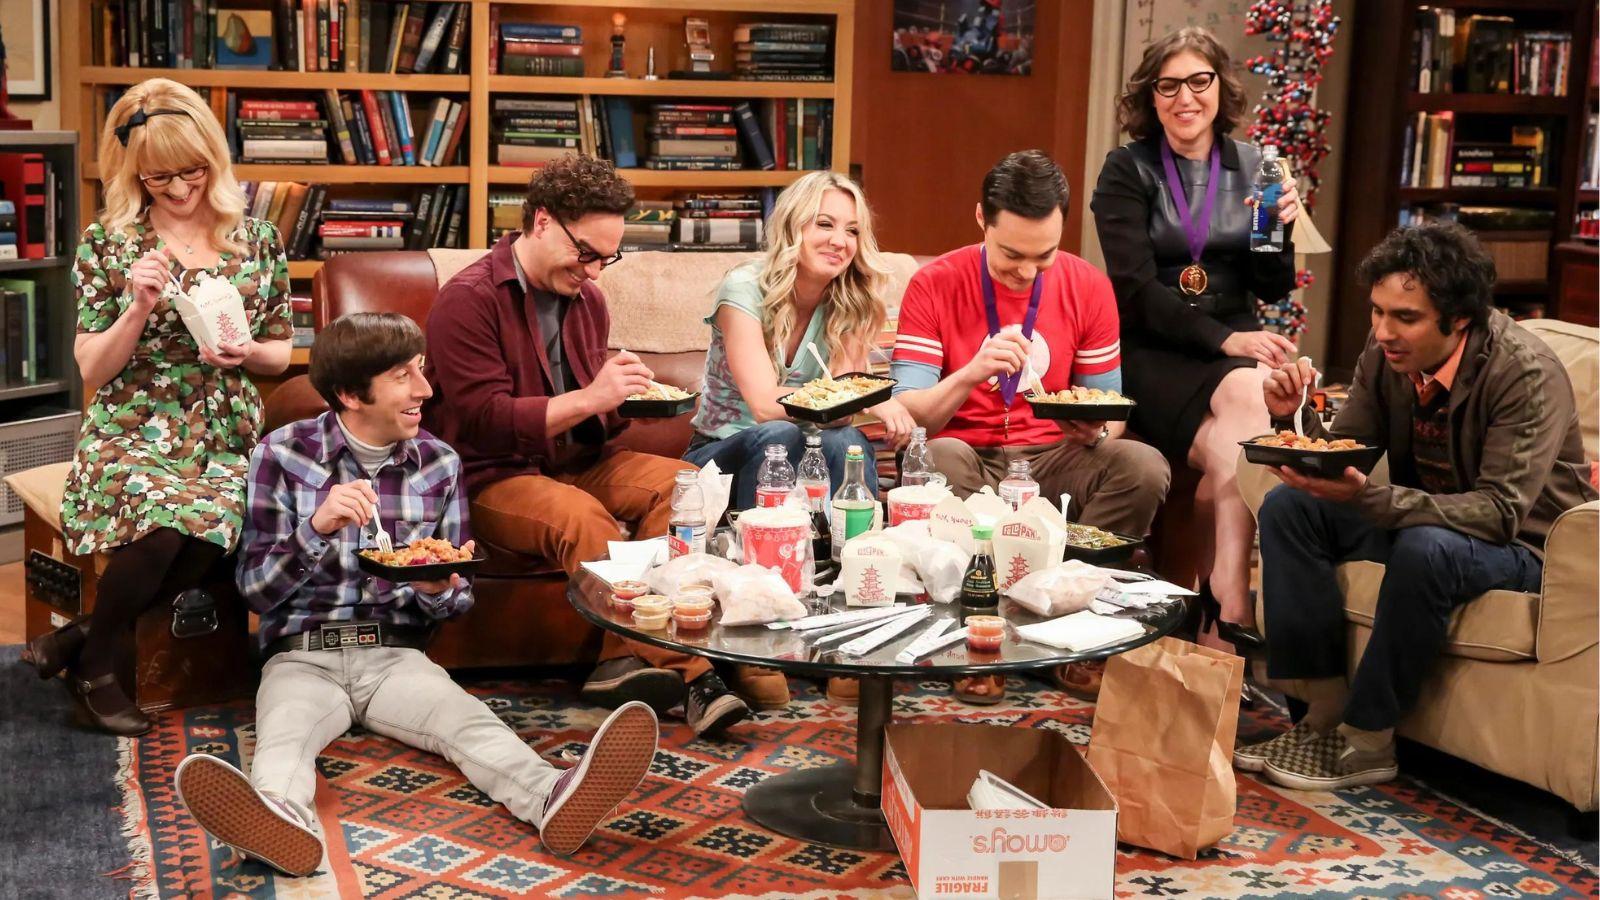 The cast of The Big Bang Theory